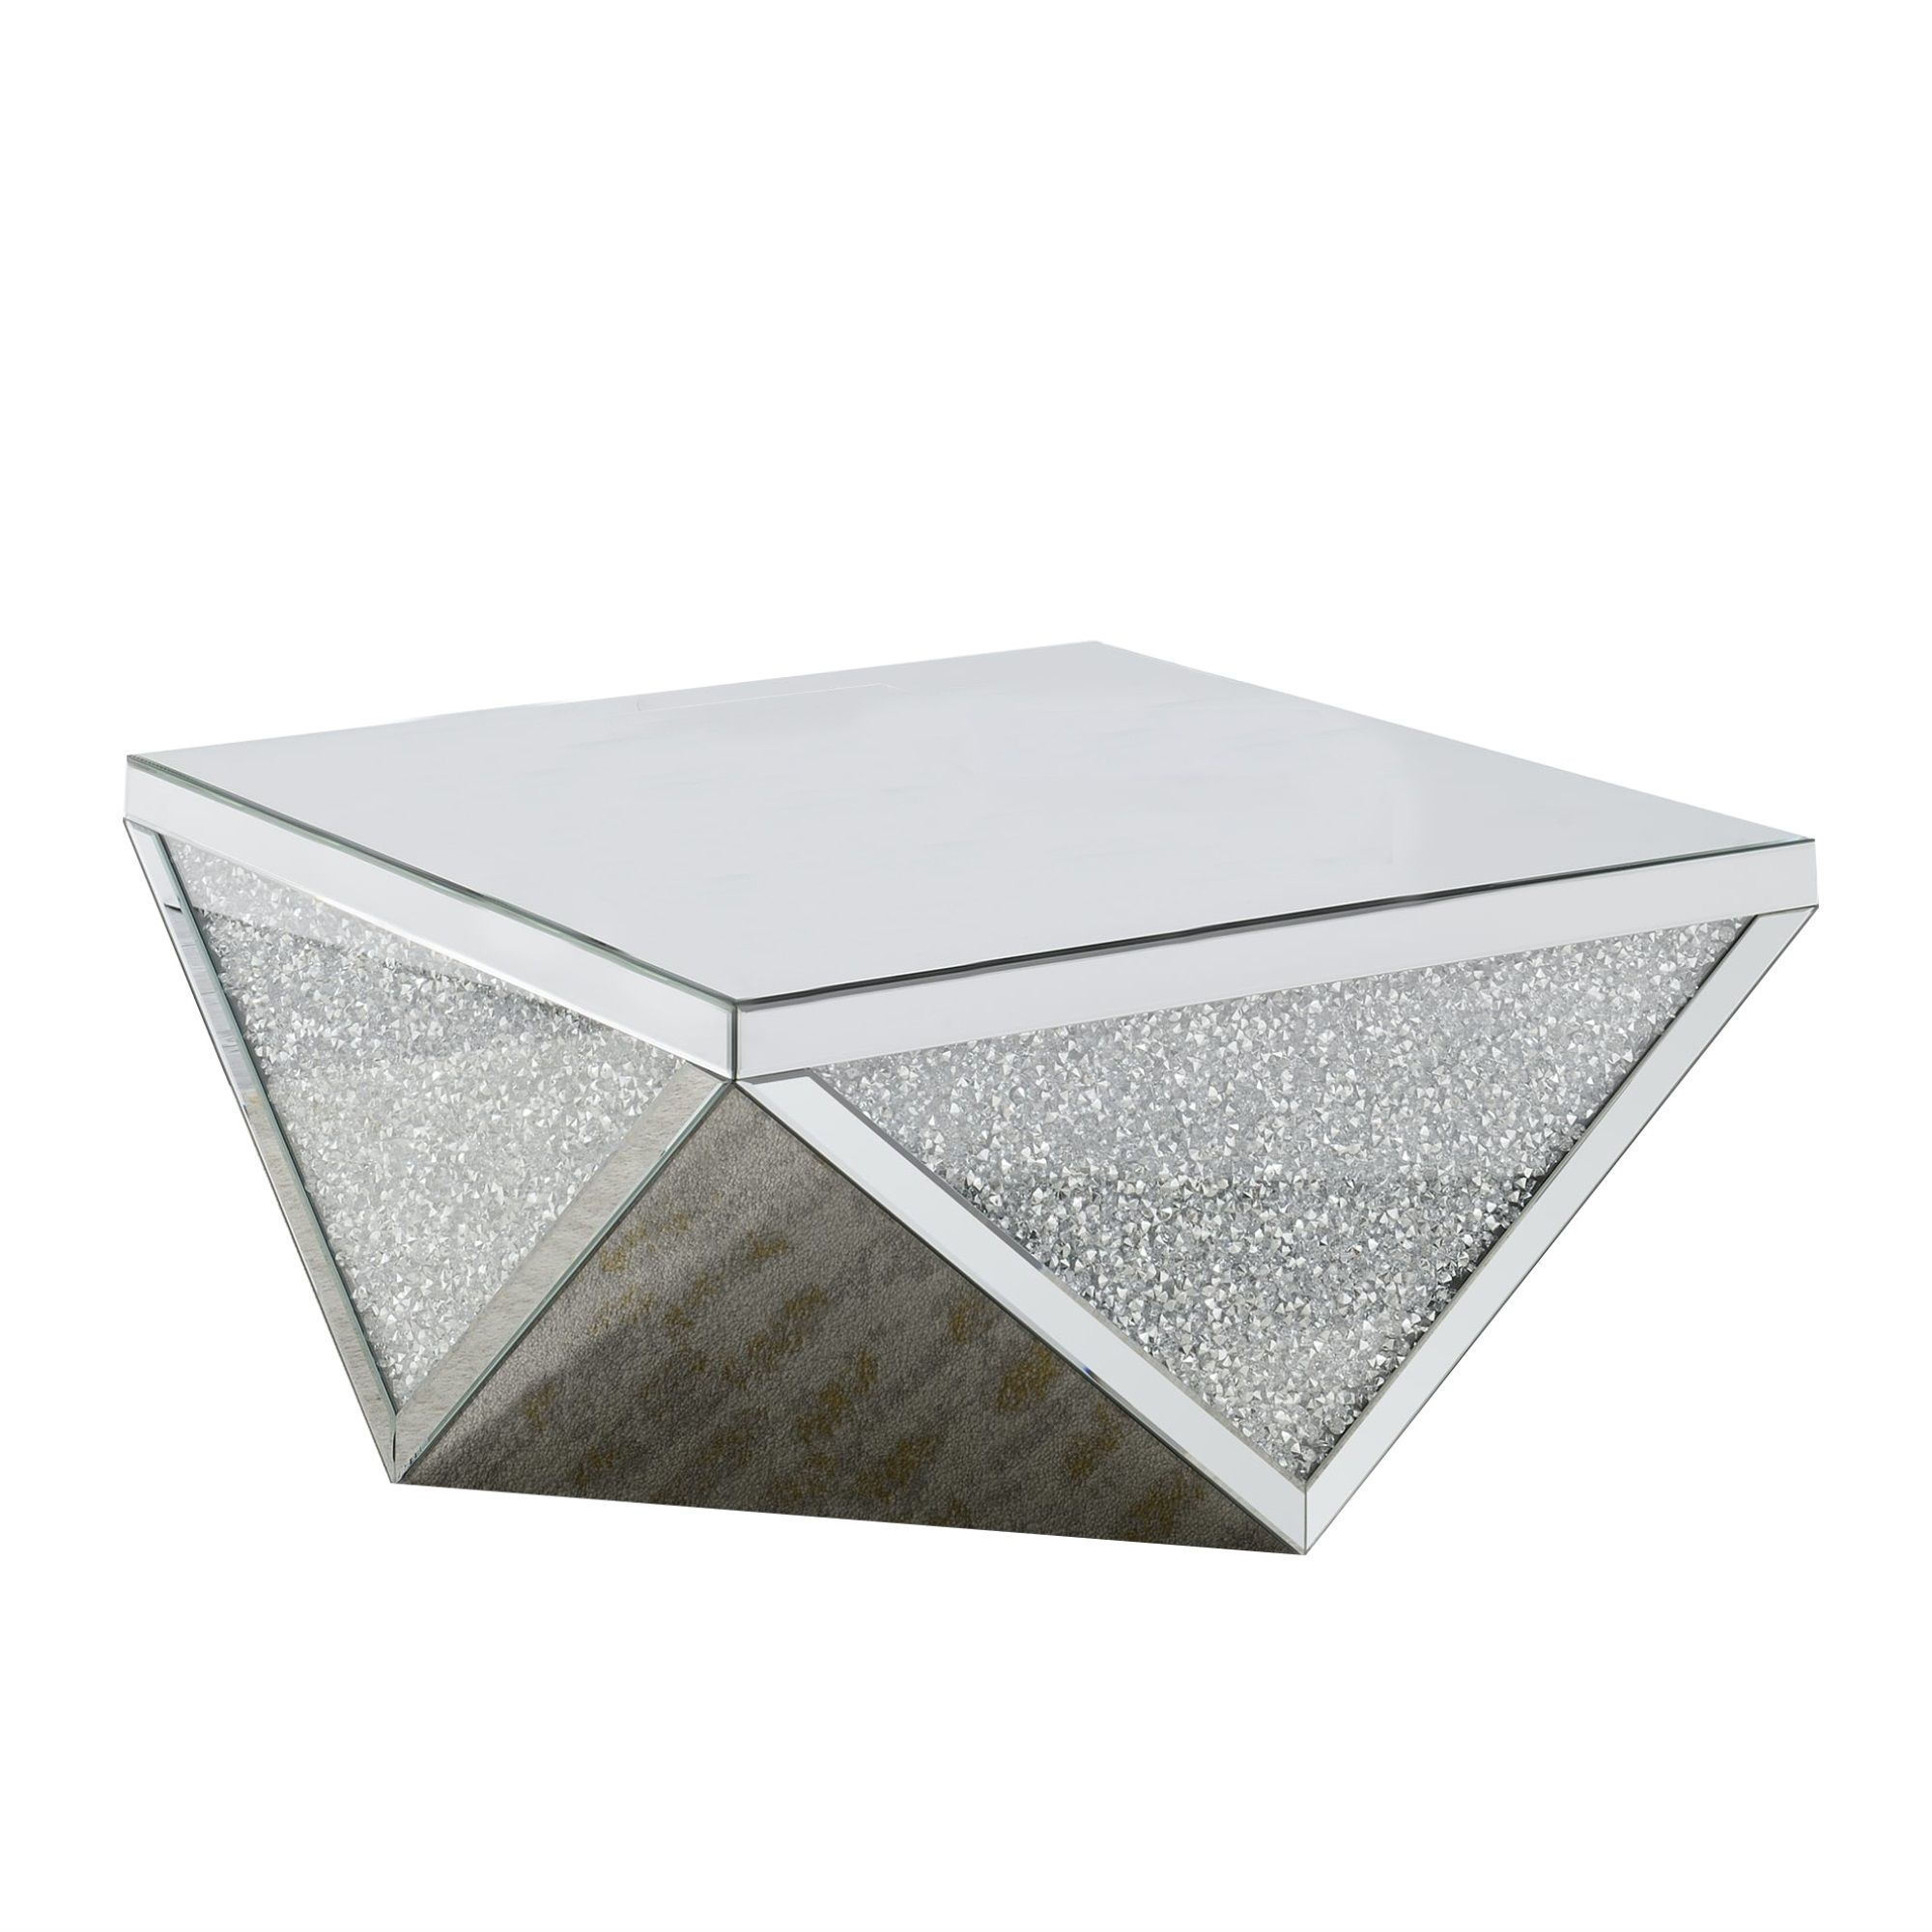 Wood And Mirror Coffee Table In Diamond Shape With Crystal Inserts, Silver  – Walmart For Diamond Shape Coffee Tables (View 8 of 20)